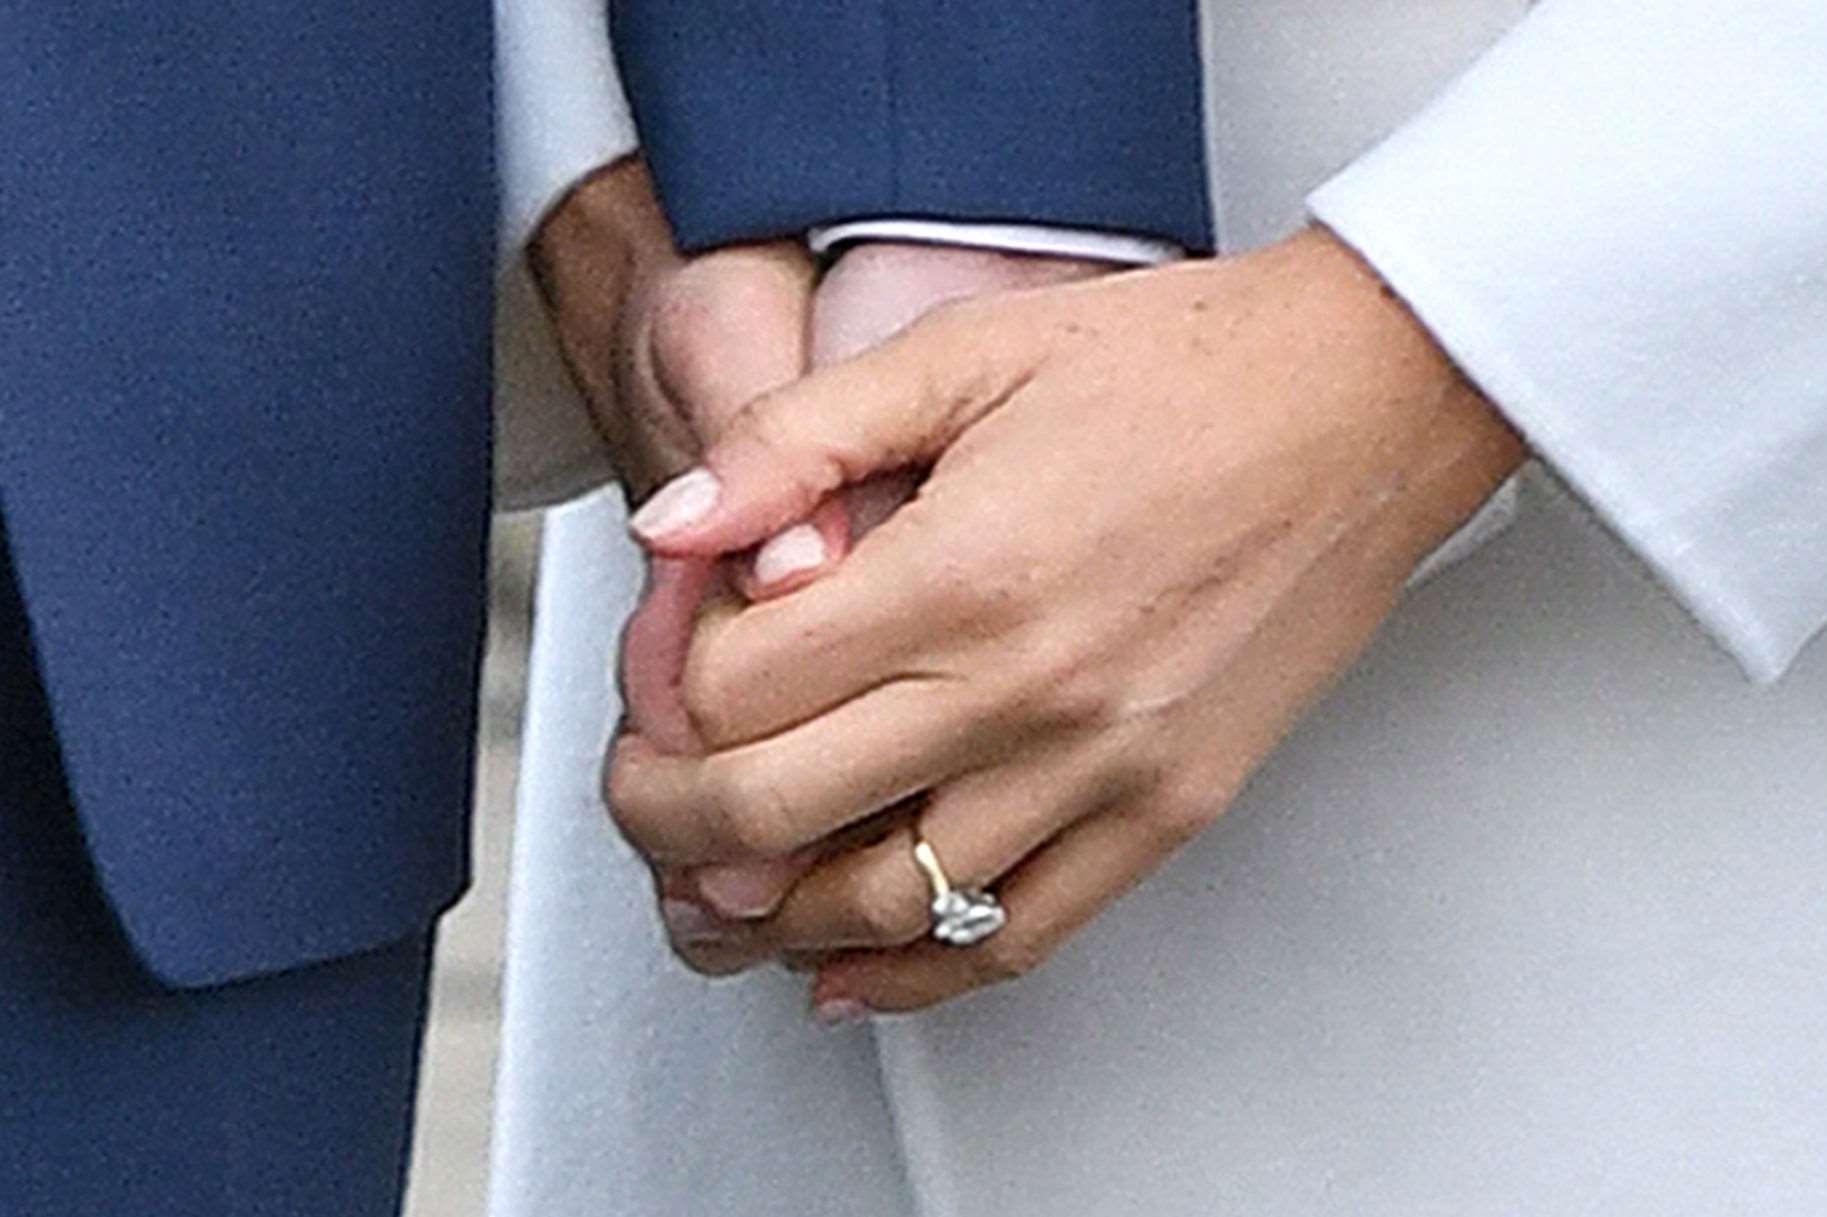 Meghan shows off her engagement ring